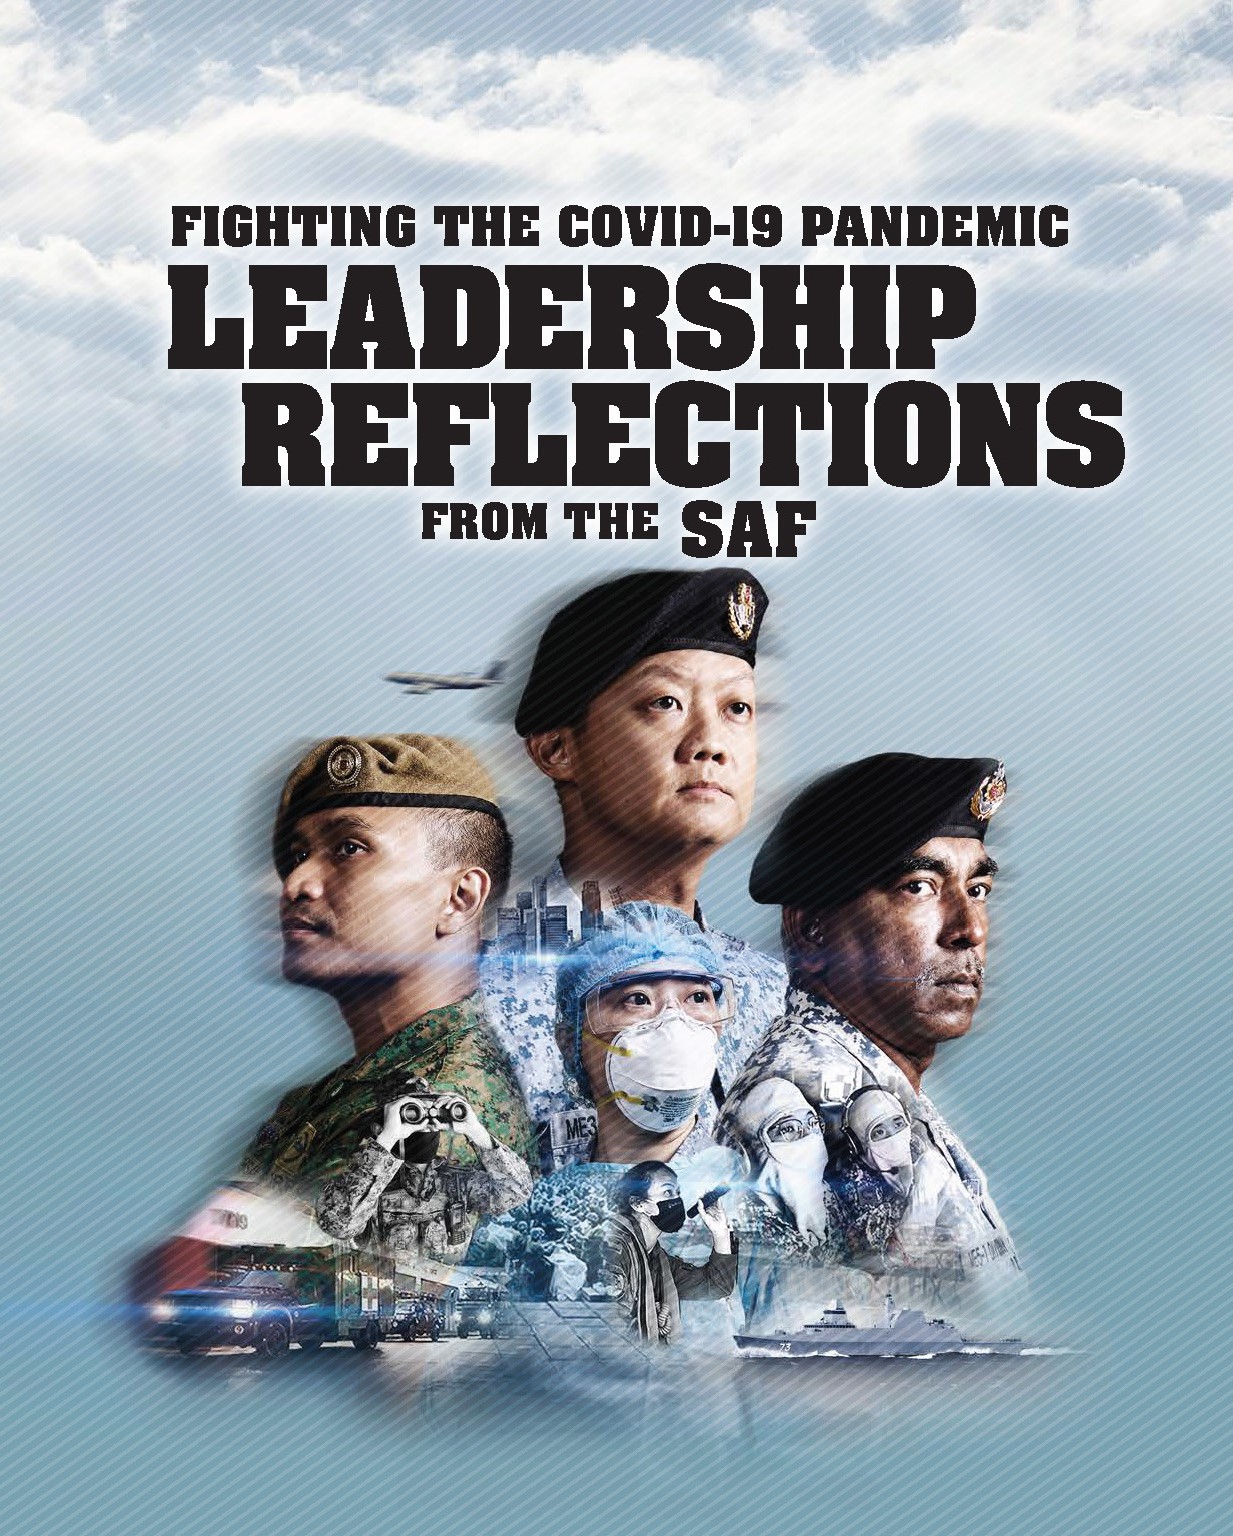 FIGHTING THE COVID-19 PANDEMIC - LEADERSHIP REFLECTIONS